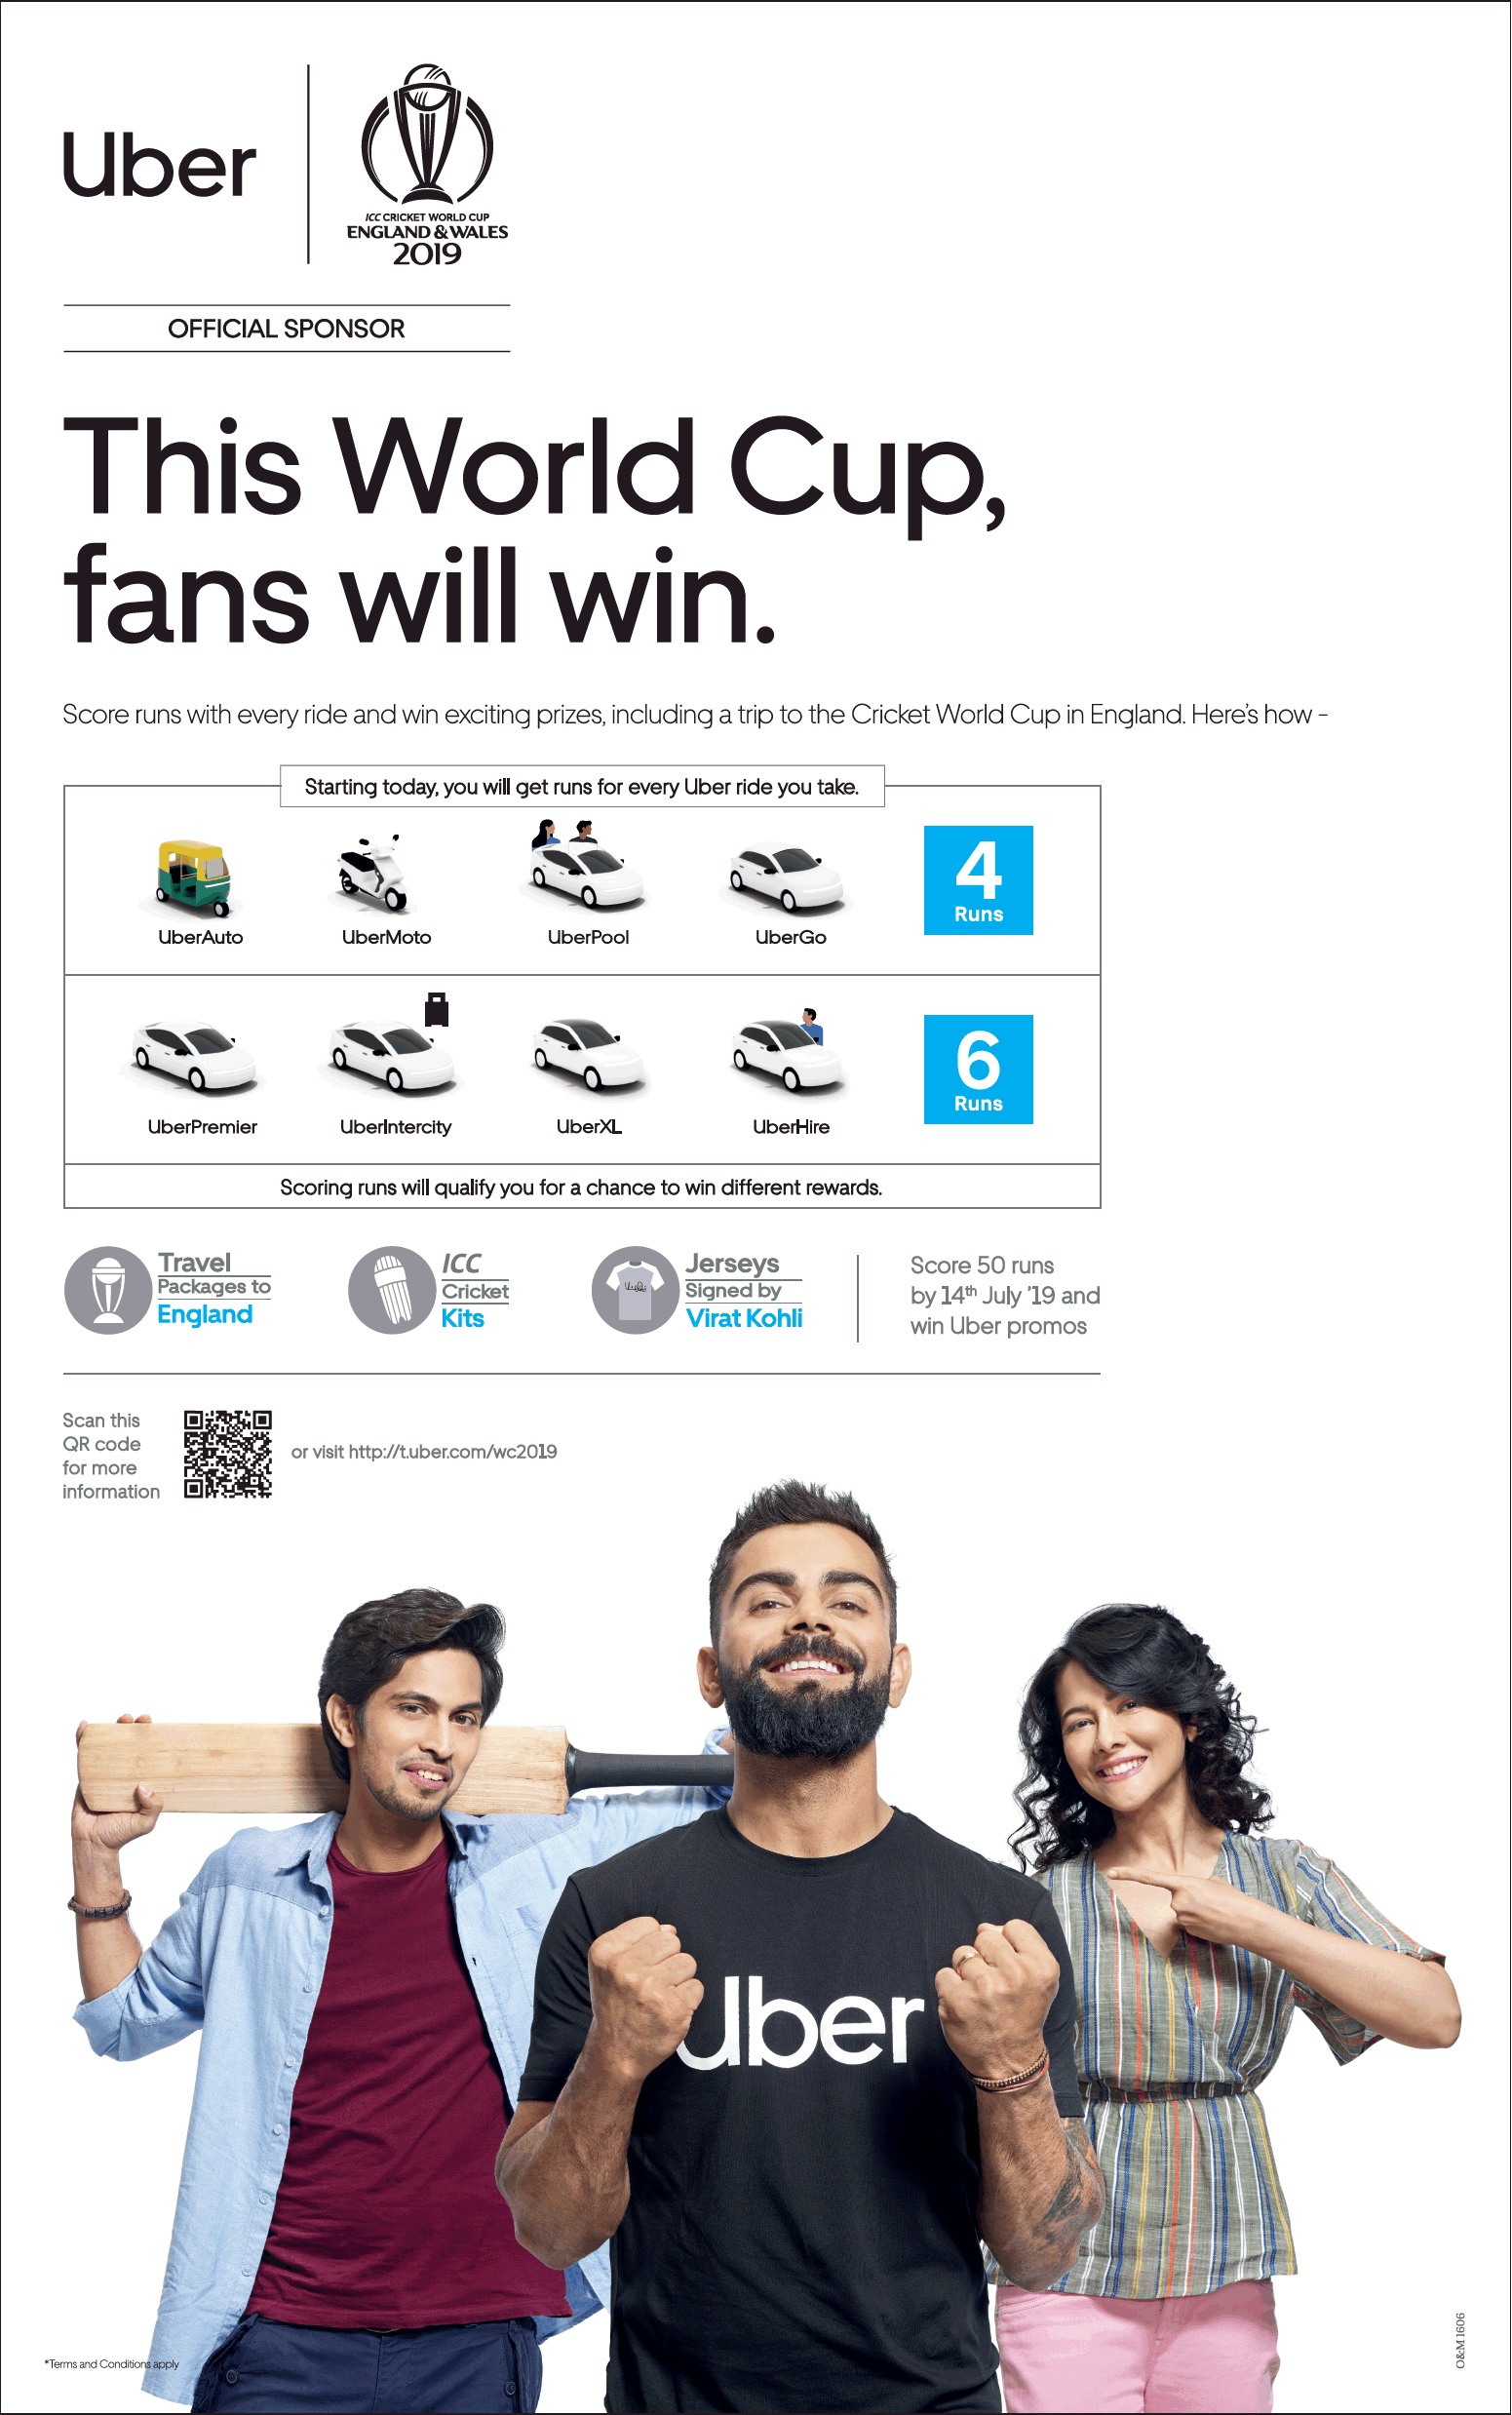 uber-official-sponsor-this-world-cup-fans-will-win-ad-times-of-india-delhi-14-05-2019.png